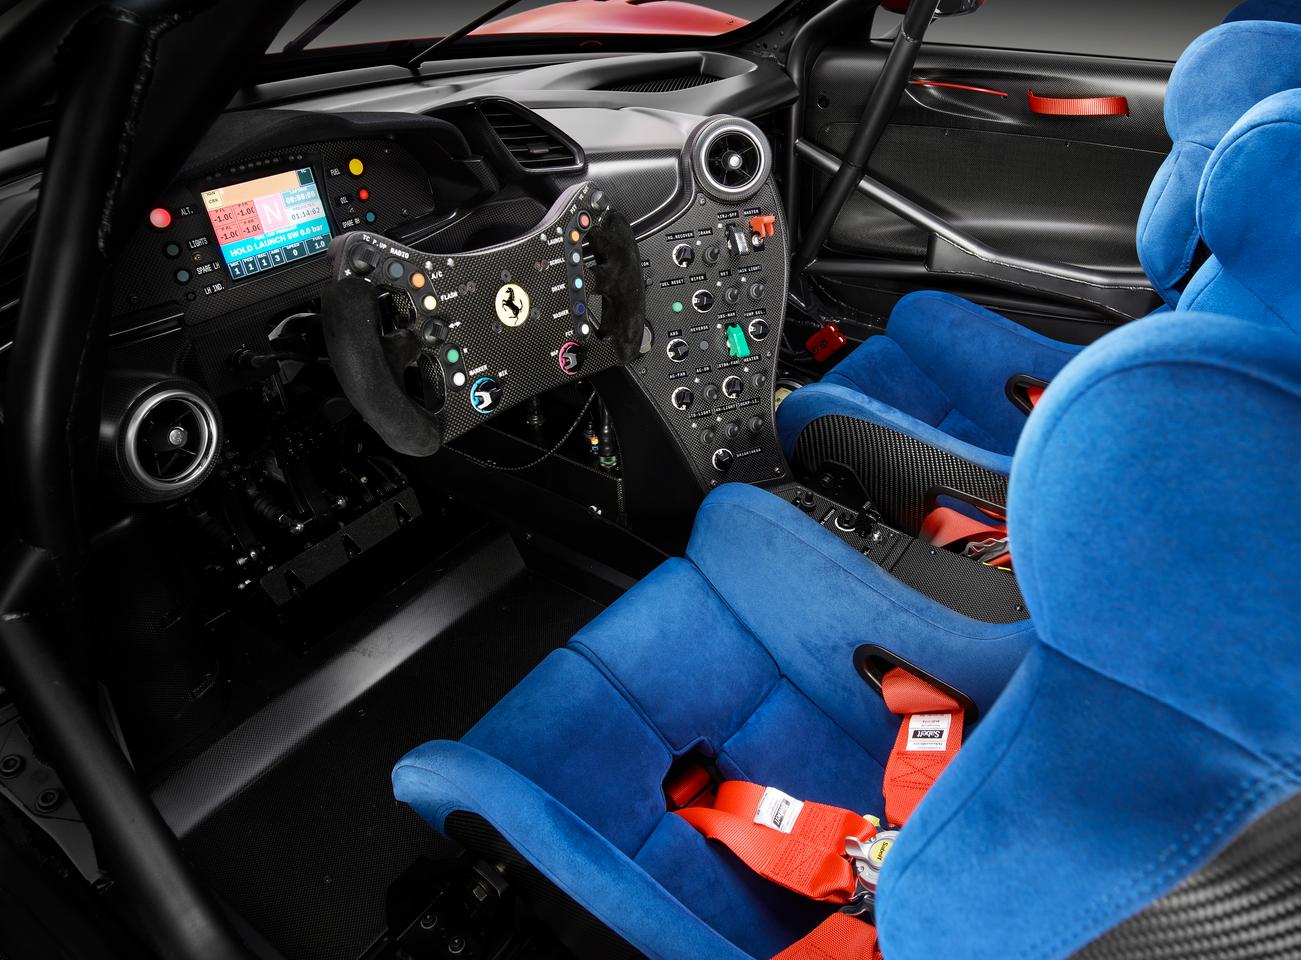 The interior is every bit a race car